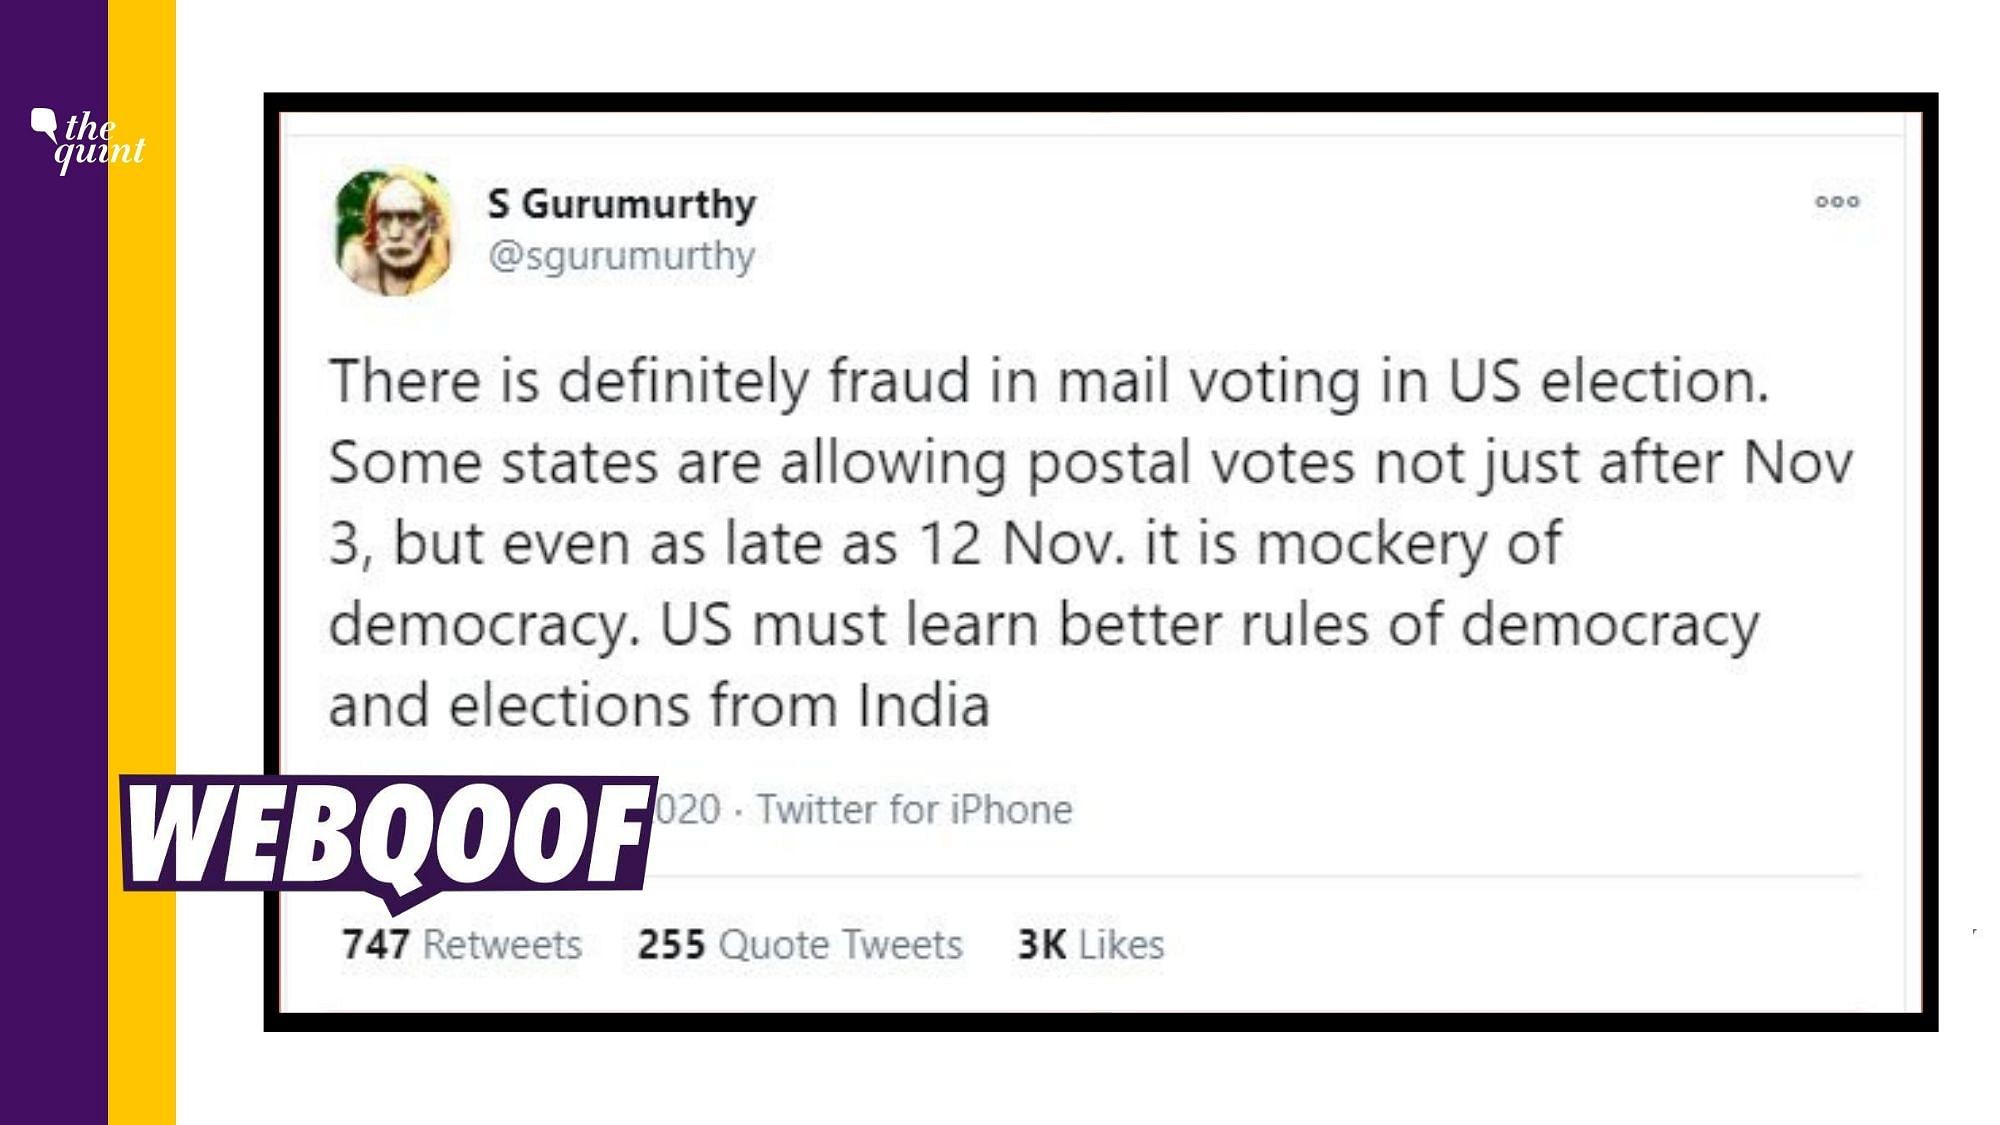 RSS ideologue and a member on the board of the Reserve Bank of India (RBI), S Gurumurthy alleged that the mail-in voting in the US is a huge election fraud.